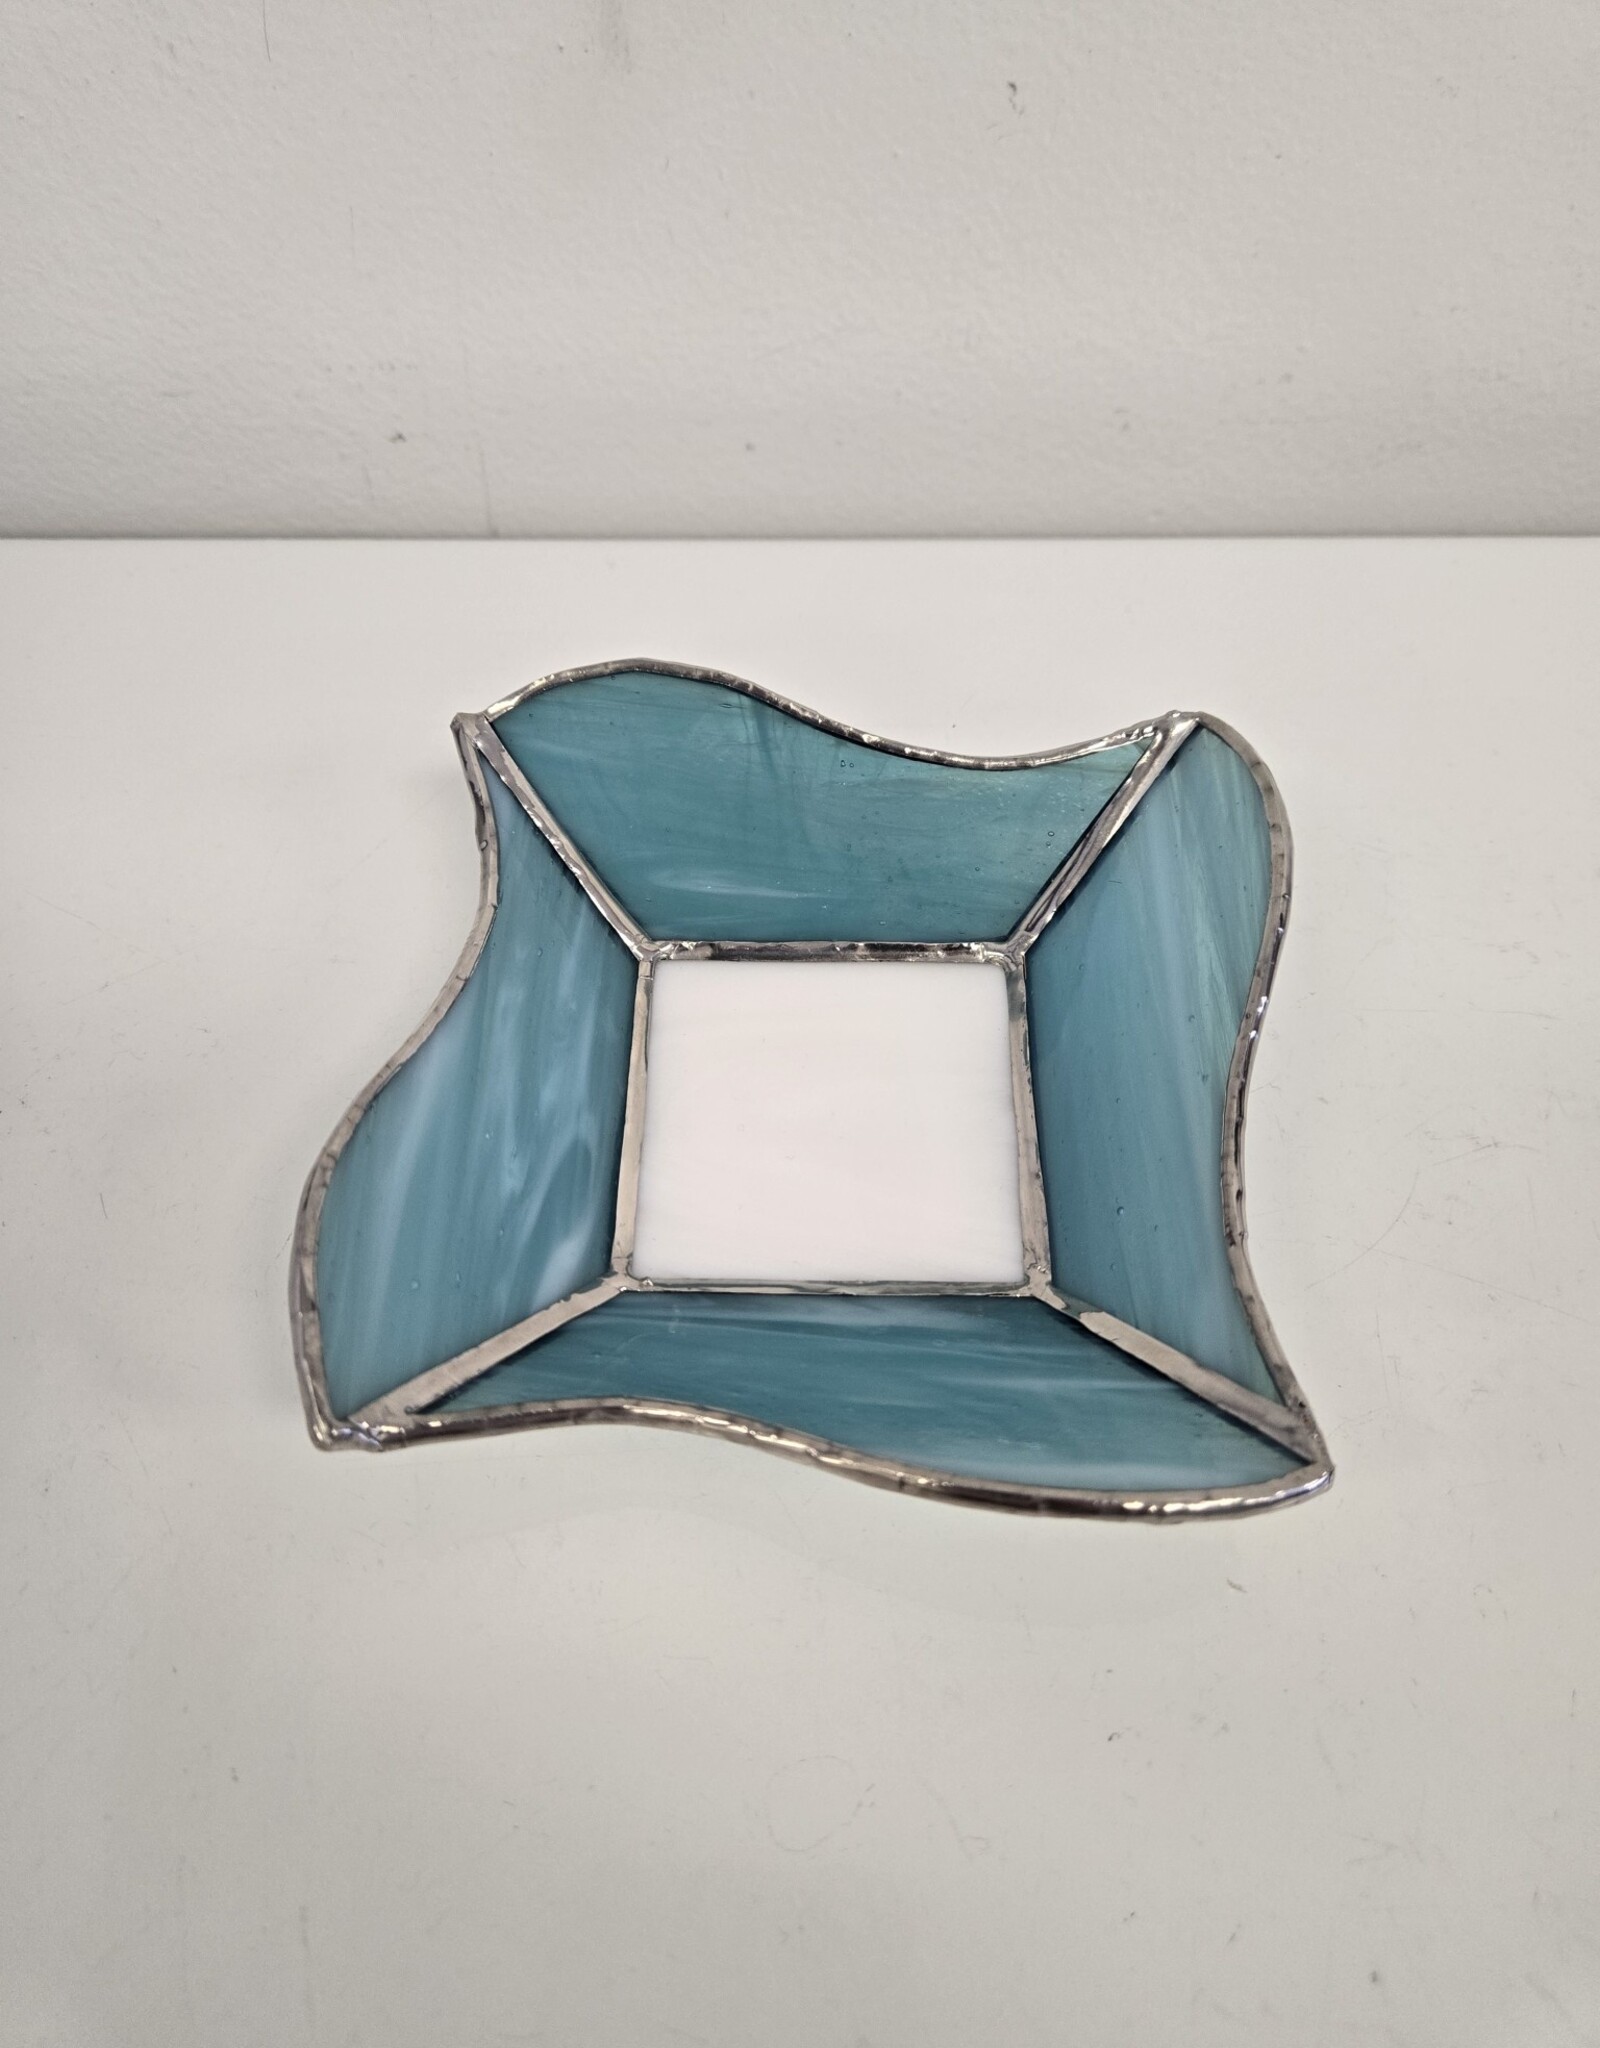 Stained Glass Dish 5"x5"x1.5" - blue & white